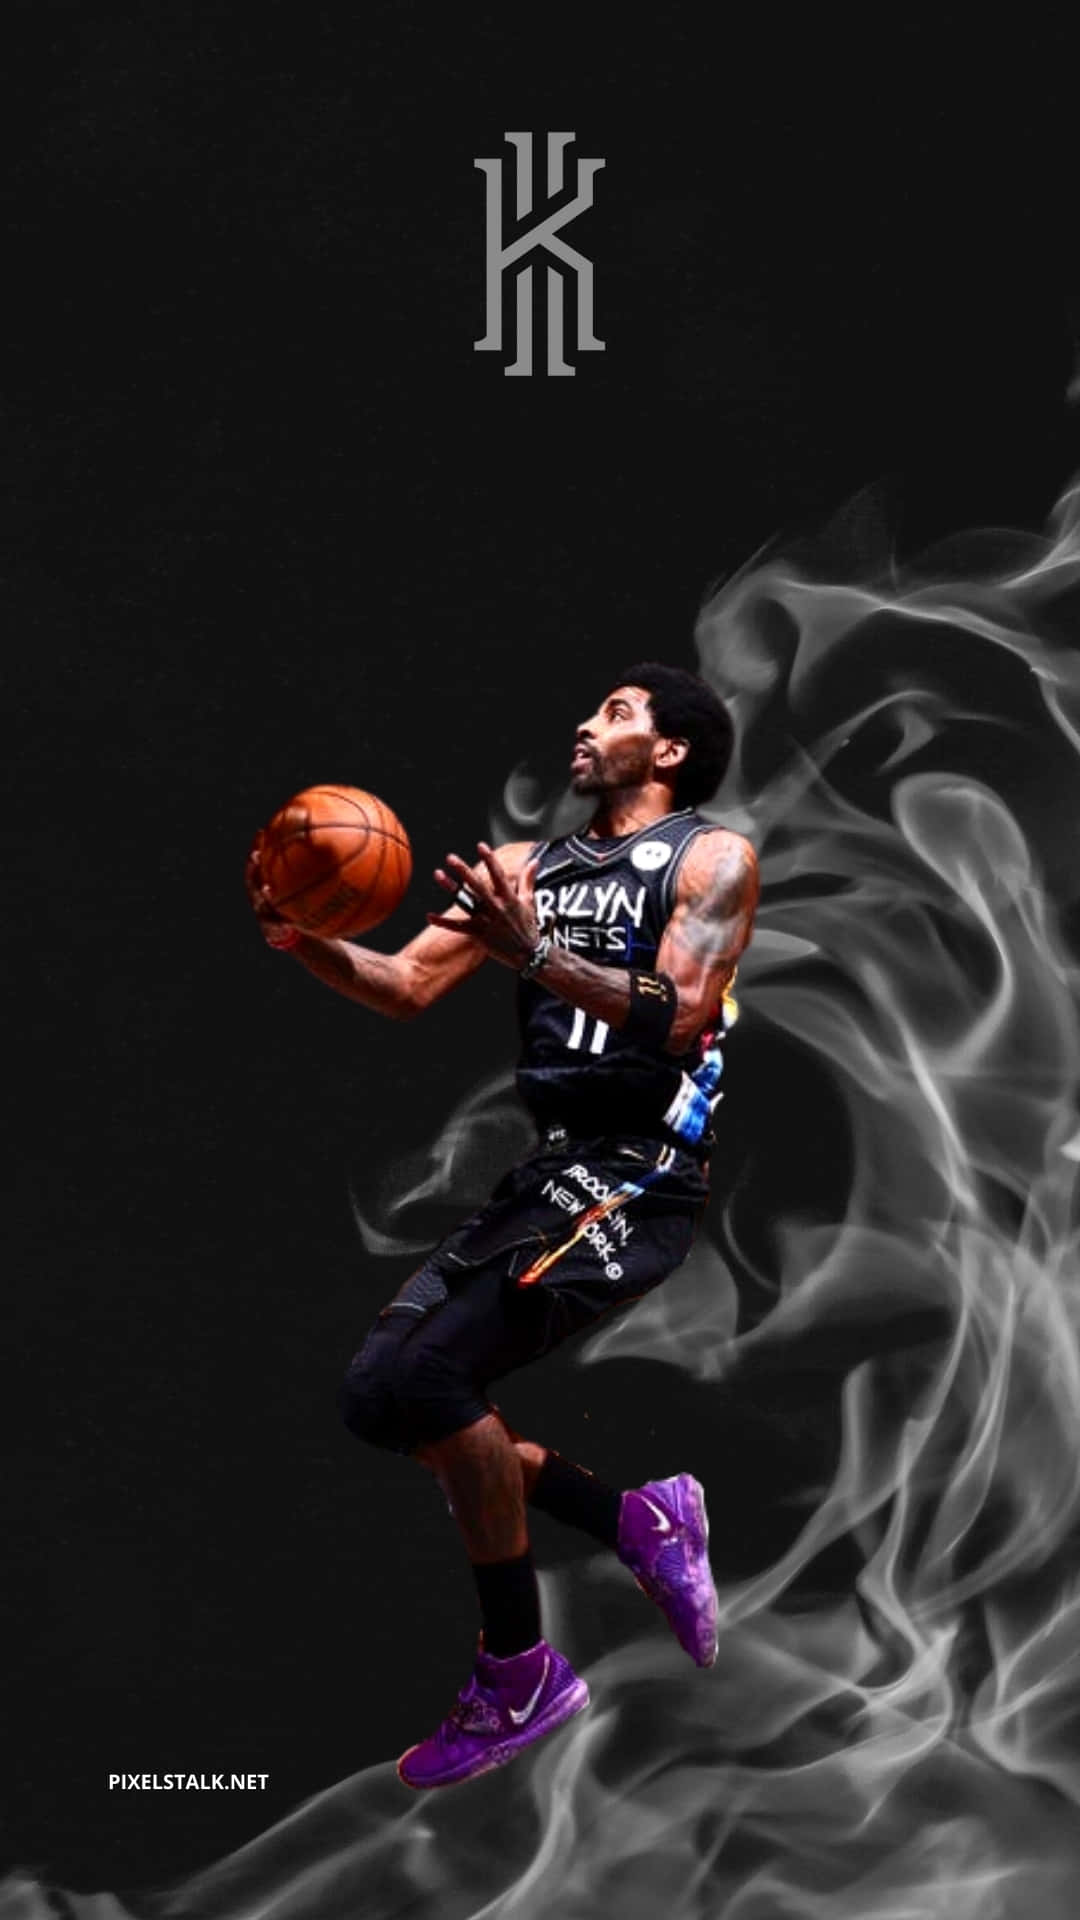 Kyrie Irving demonstrating his cool style. Wallpaper